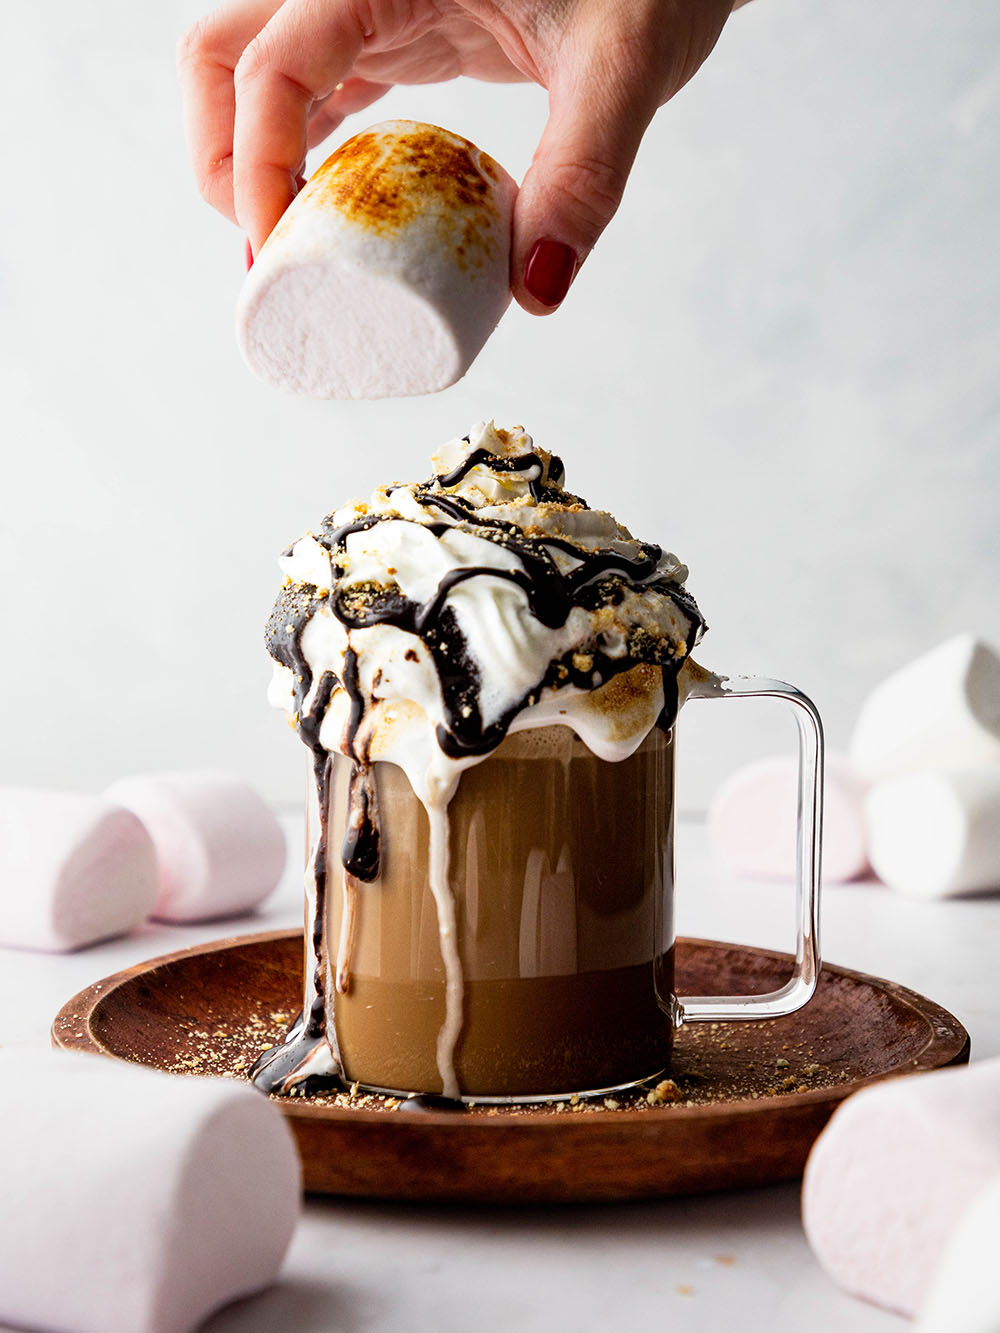 A glass jug filled with chocolate coffee and marshmallow milk is topped with whipped cream, chocolate sauce and crushed digestive biscuits. Marshmallows are scattered around on a marble grey backdrop and a hand is about to place a toasted marshmallow on top of the drink.